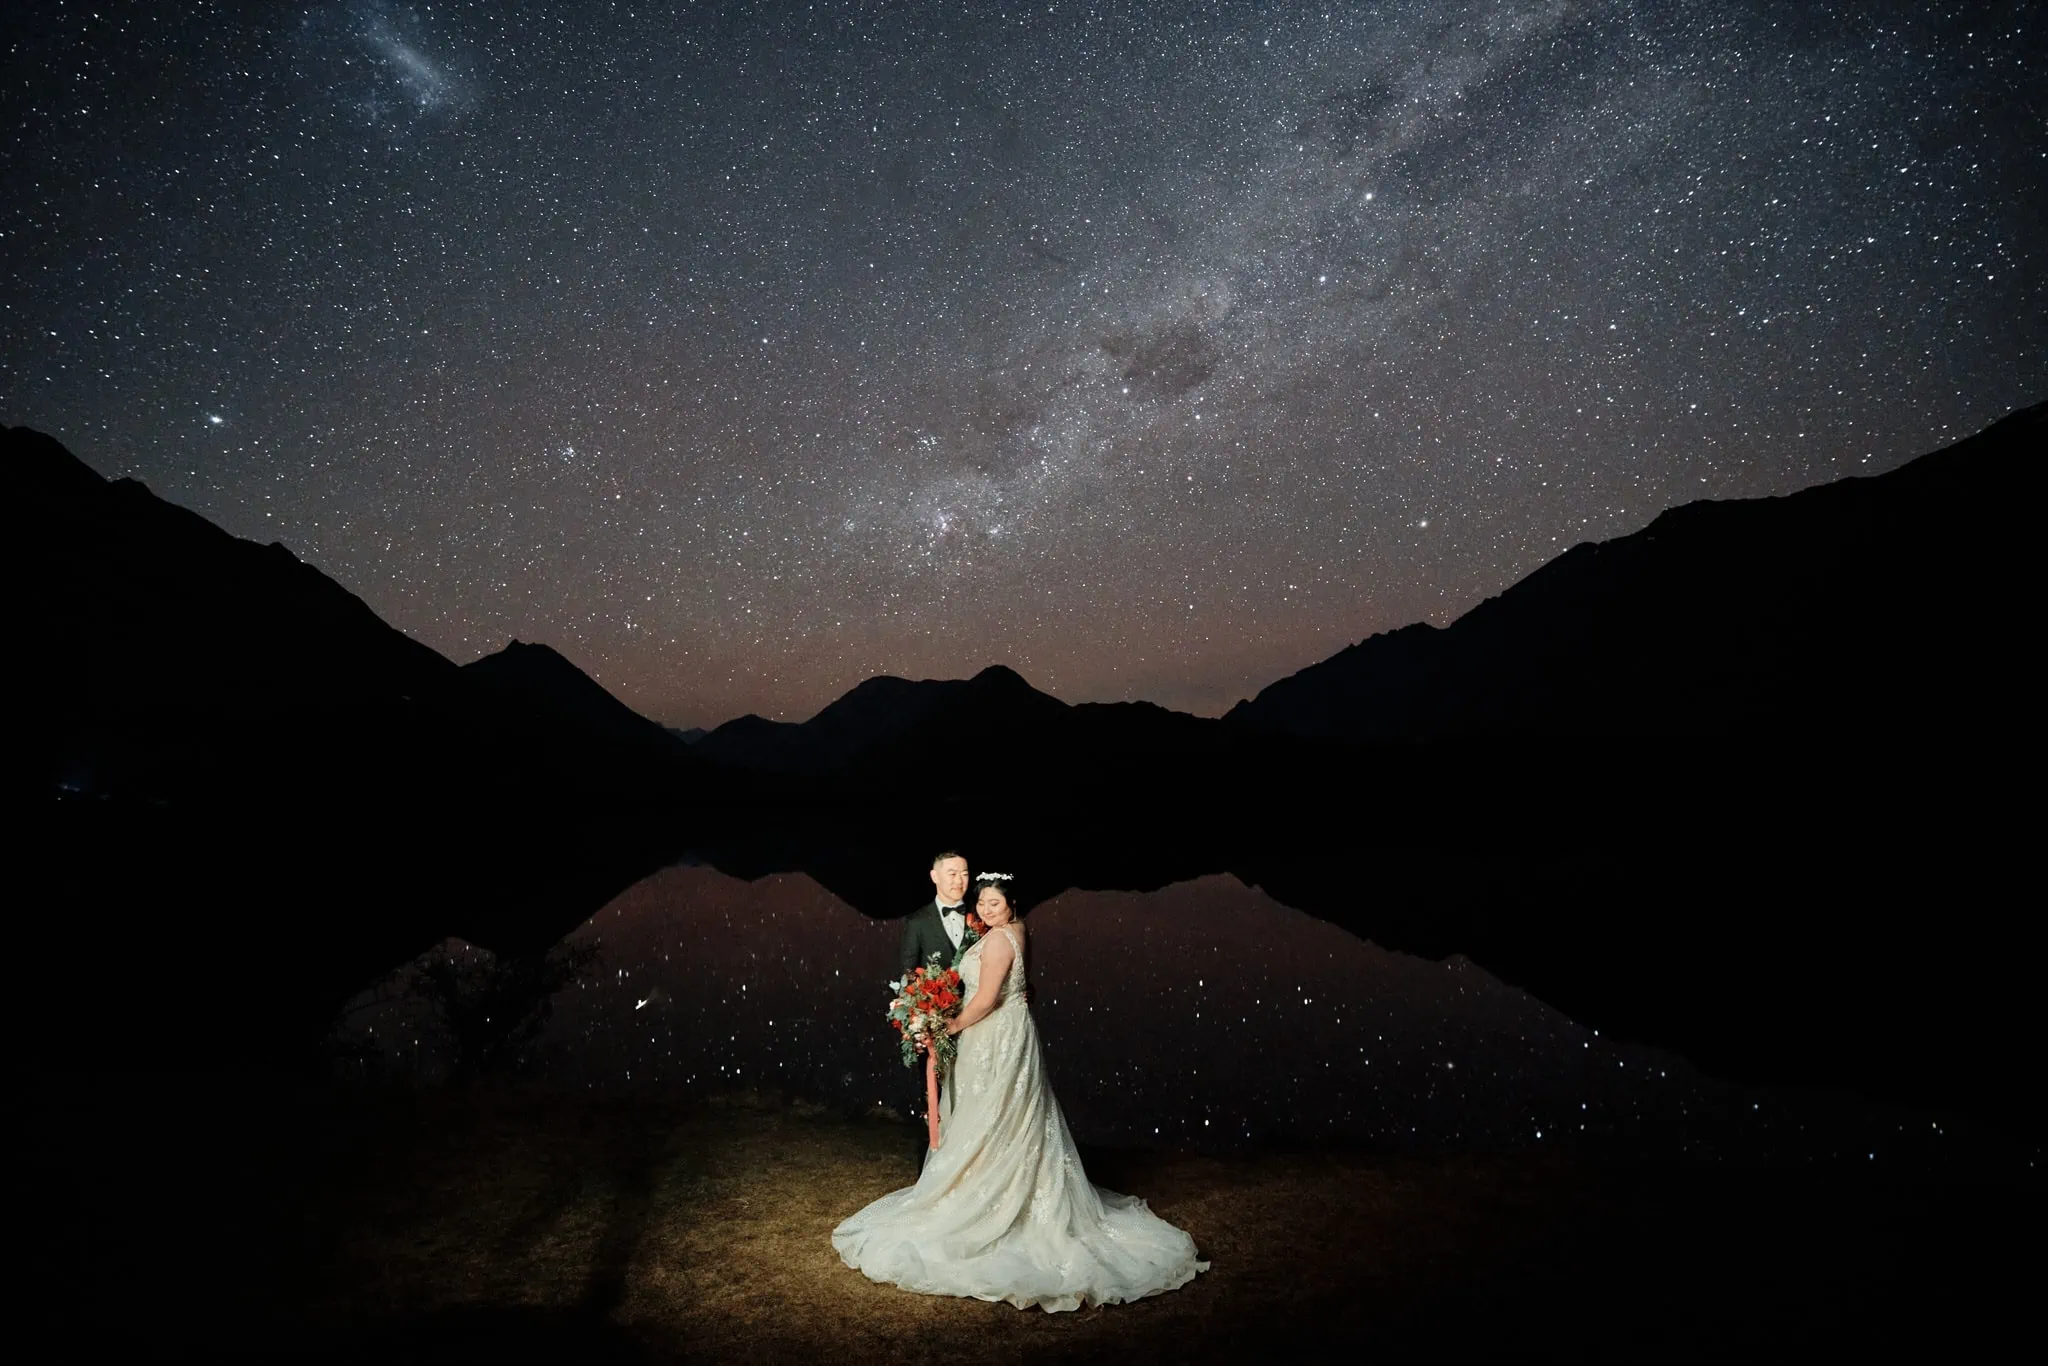 Queenstown New Zealand Elopement Wedding Photographer - A bride and groom standing in front of a lake under the starry night.